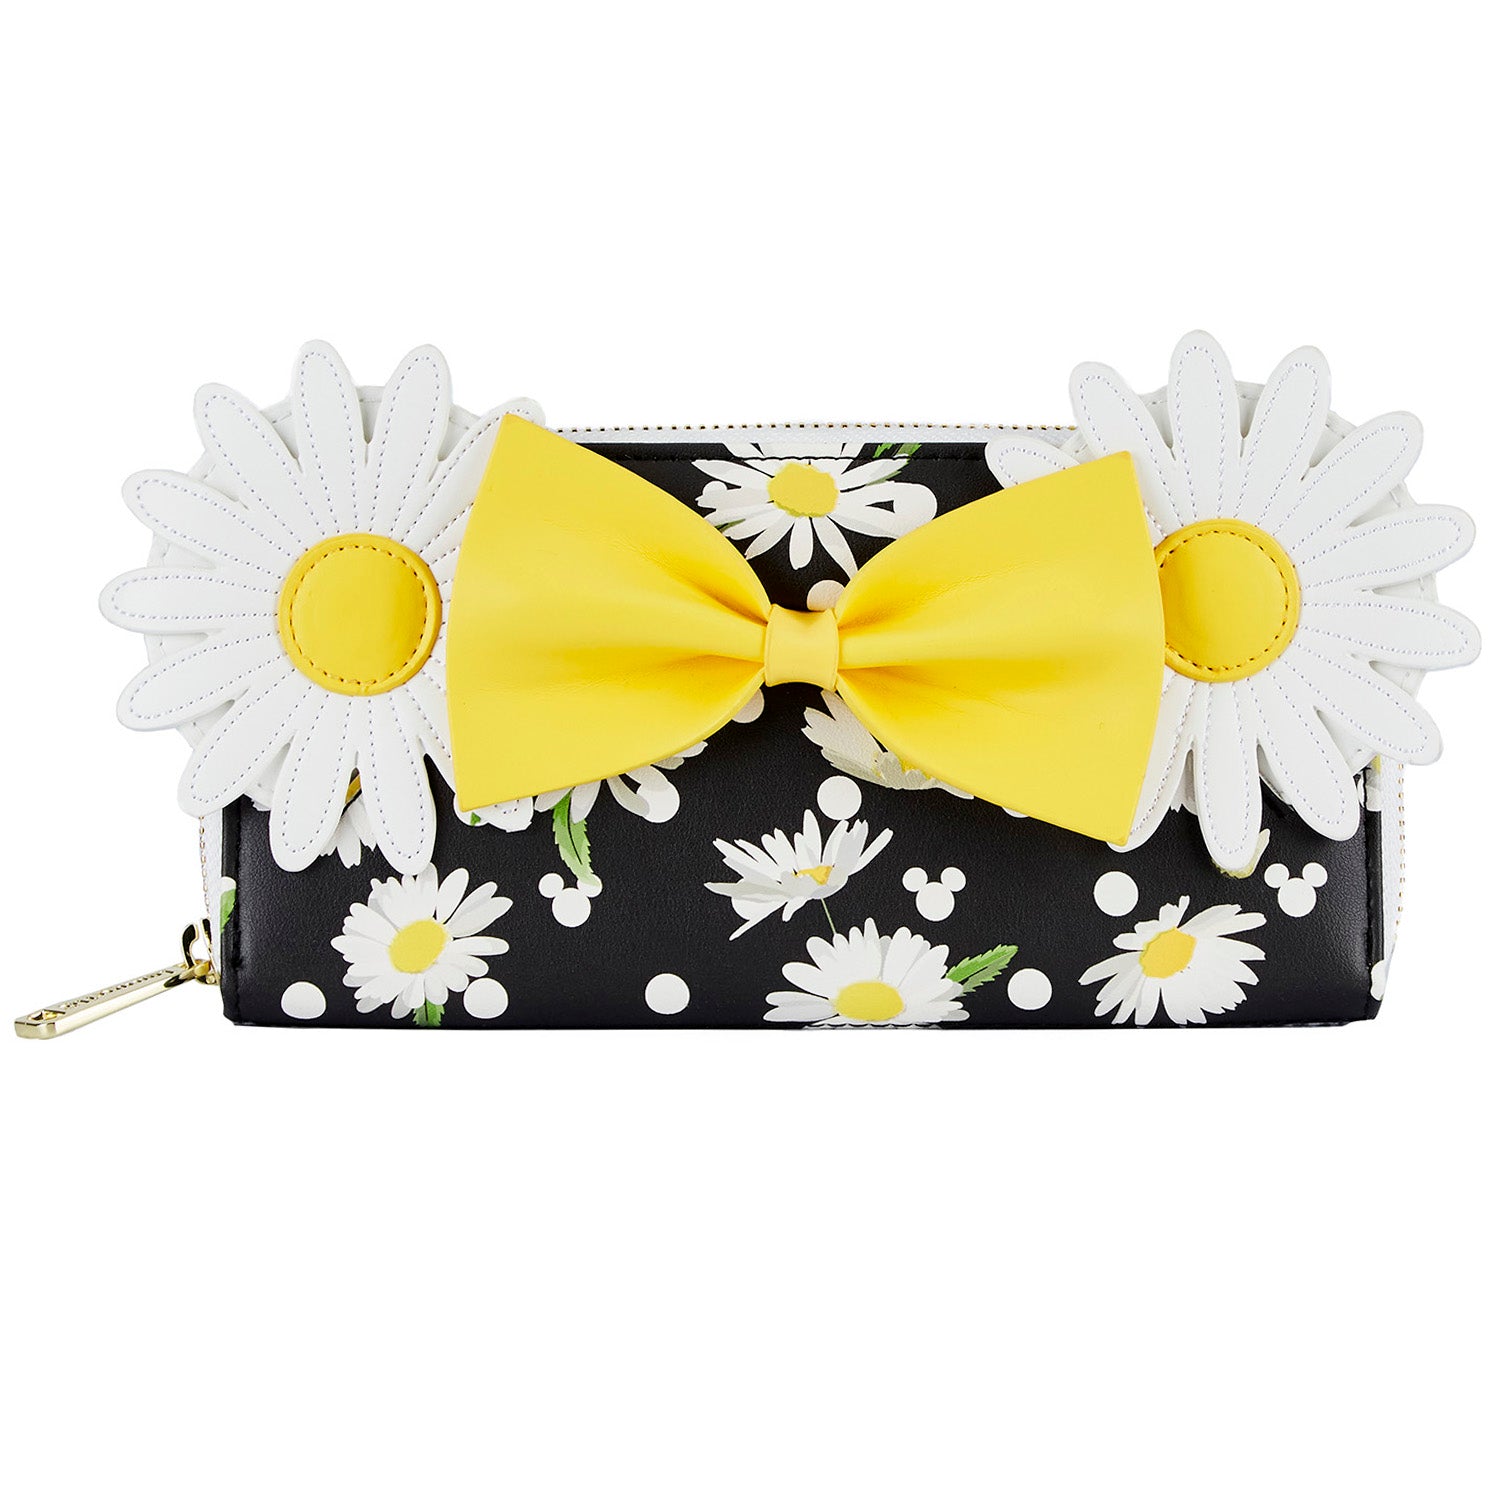 Loungefly Disney Minnie Mouse Daisies Ziparound Wallet